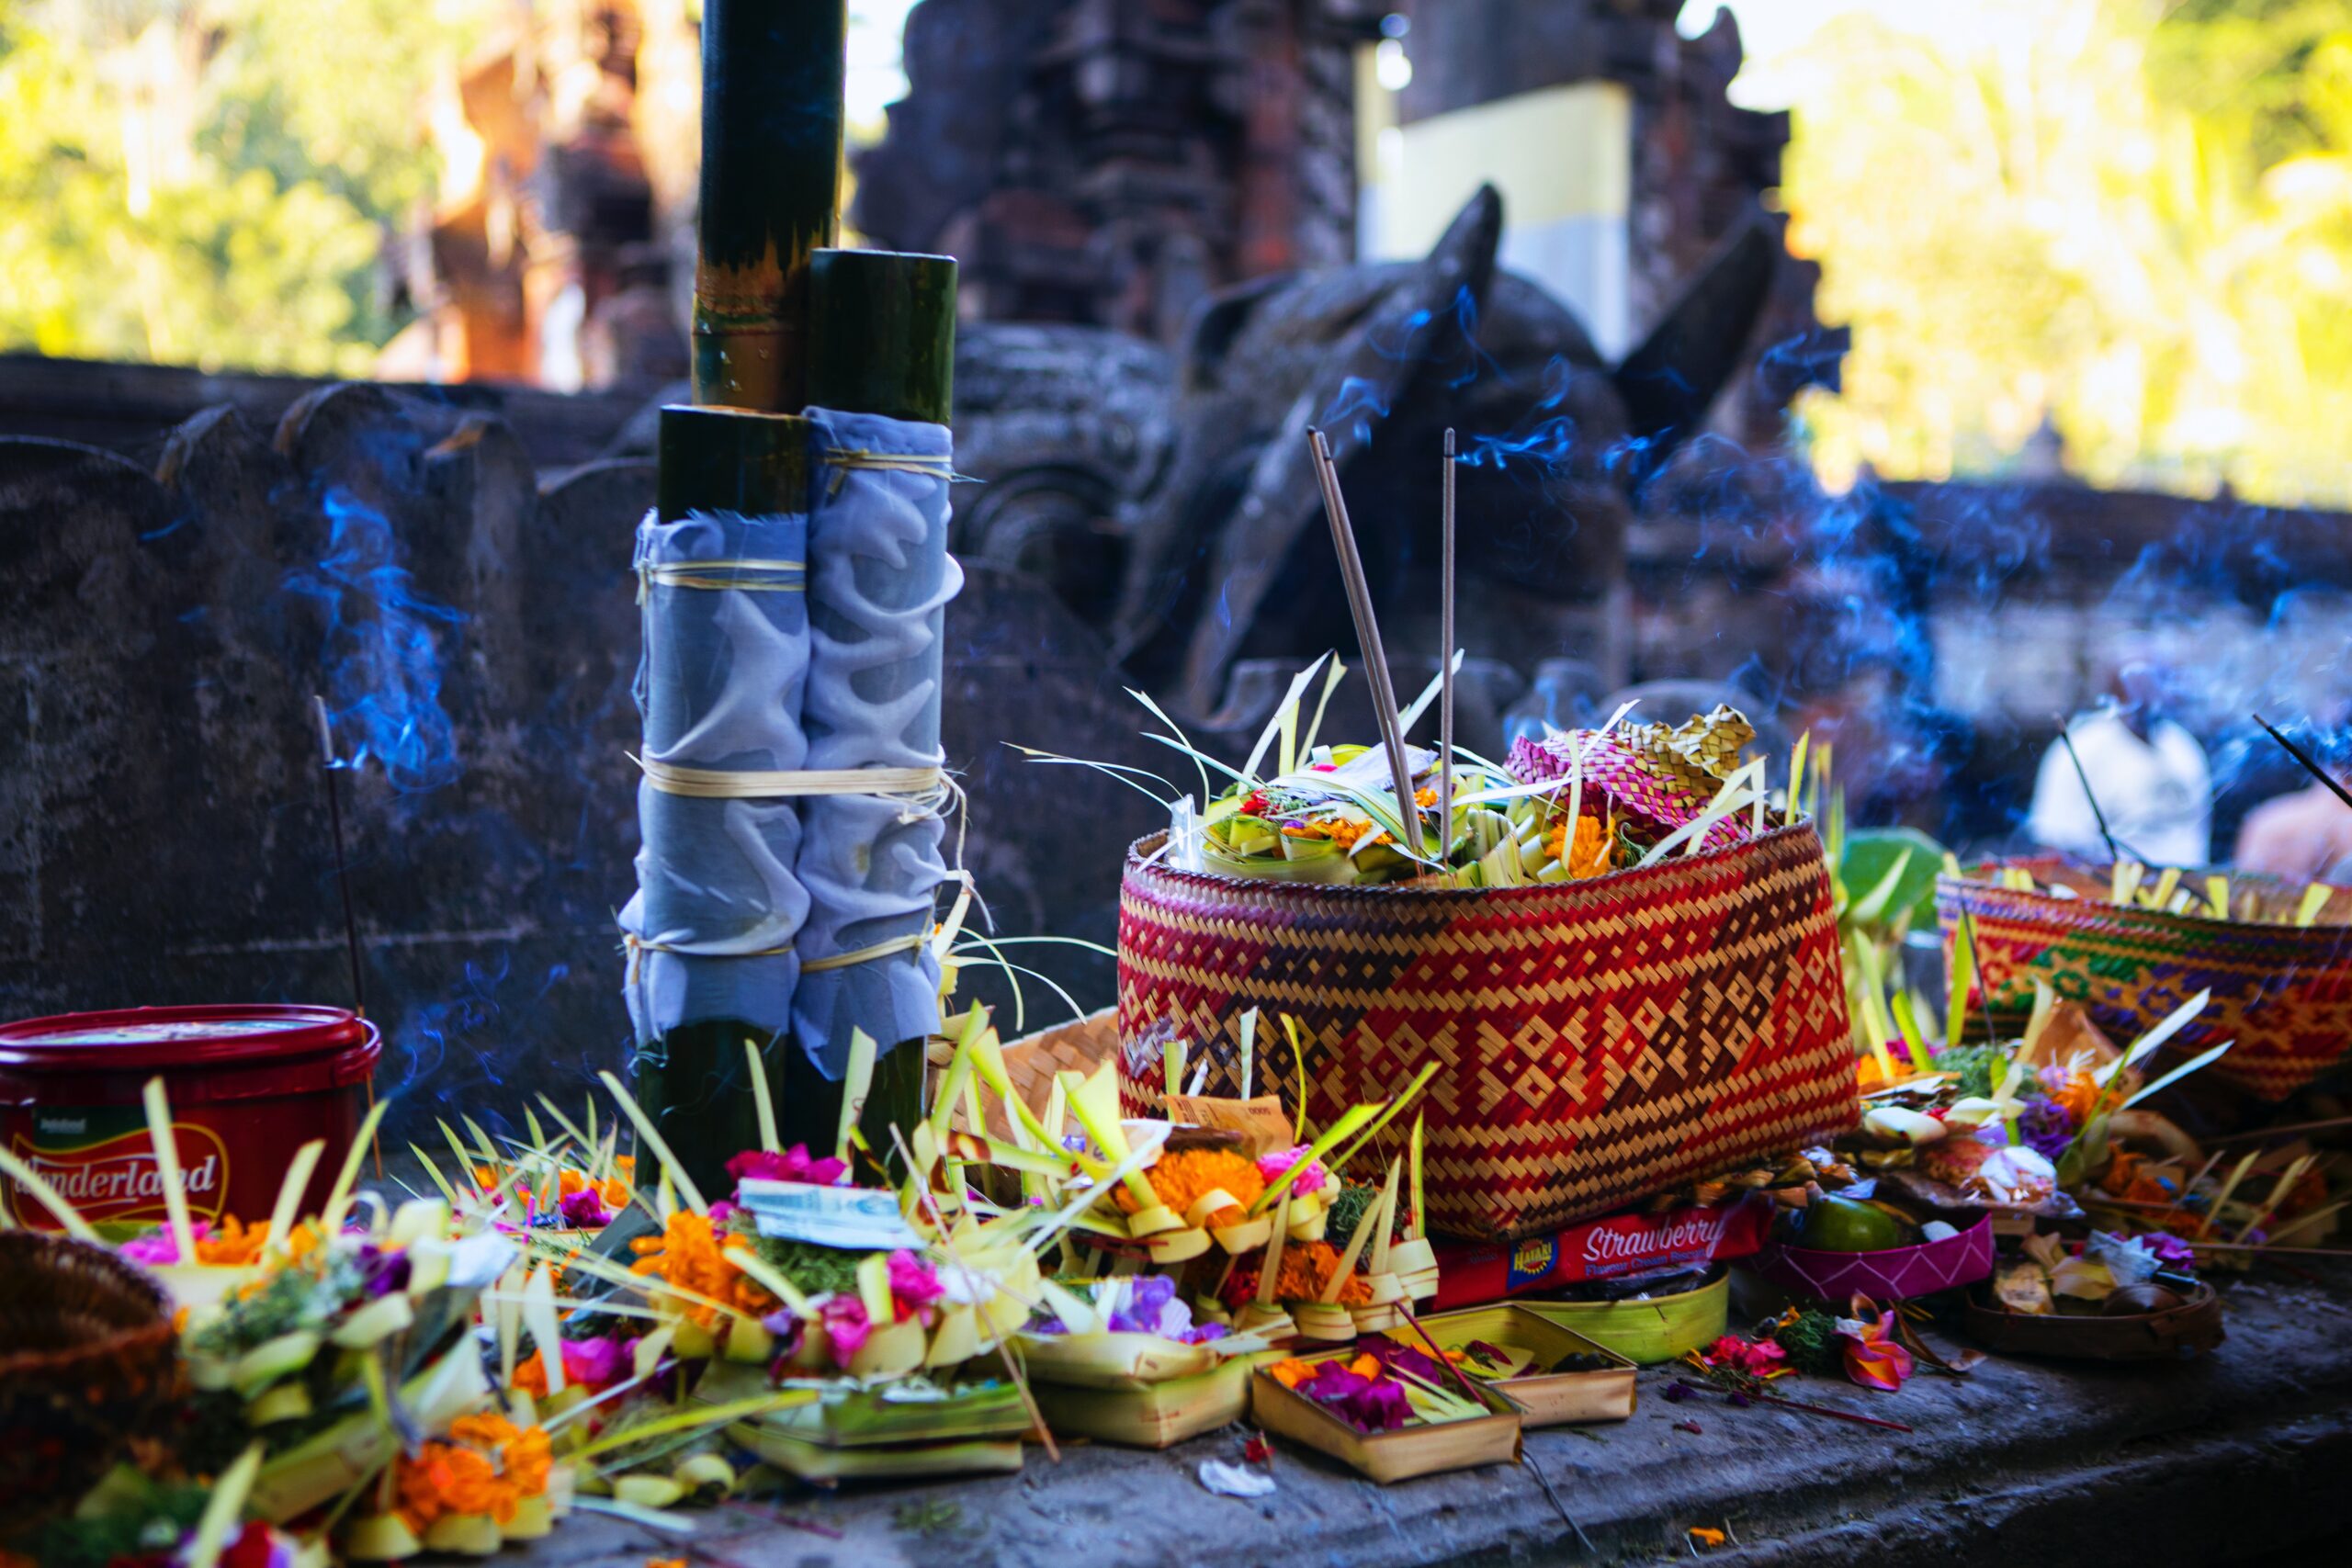 Bali - Tirta Empul Temple, offerings to the gods